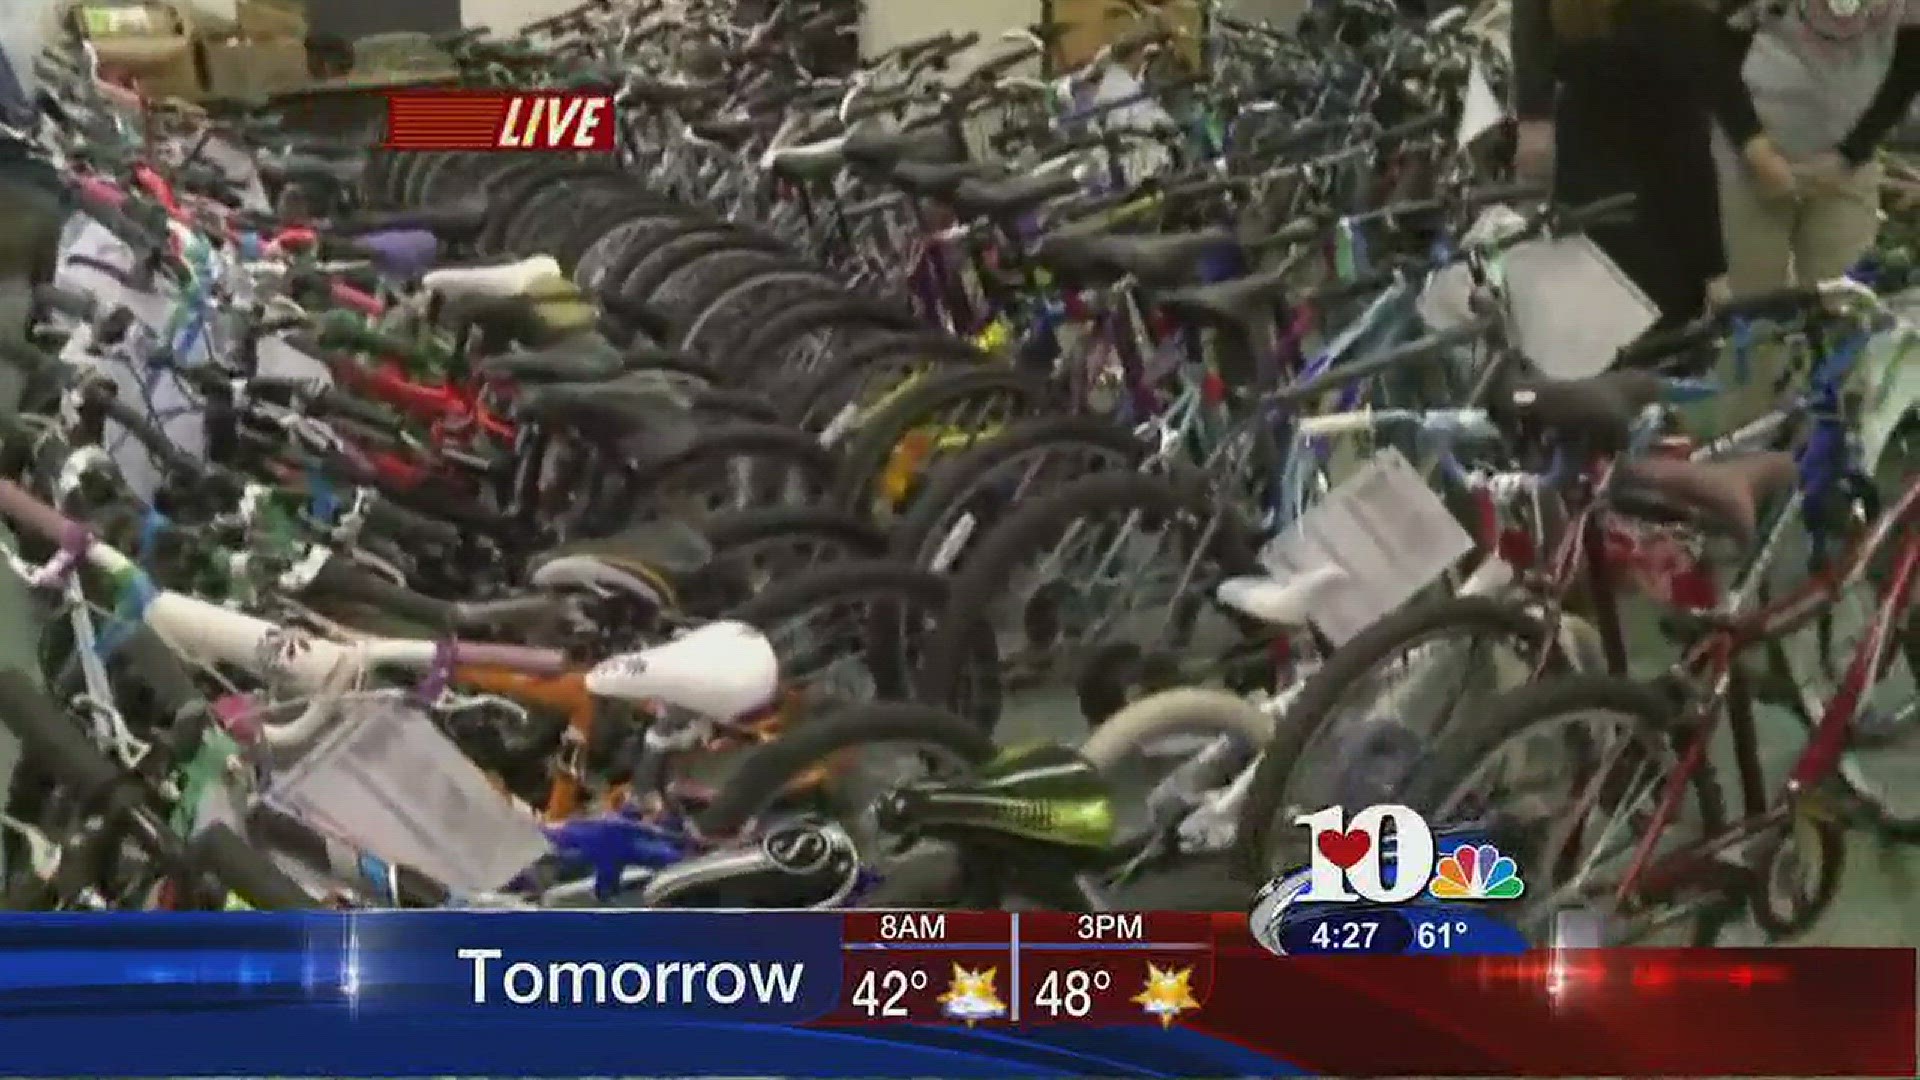 Live at Five at 4January 3, 2017Bike Elf will collect new and gently used bicycles this Saturday in Maryvillebike-elf.org